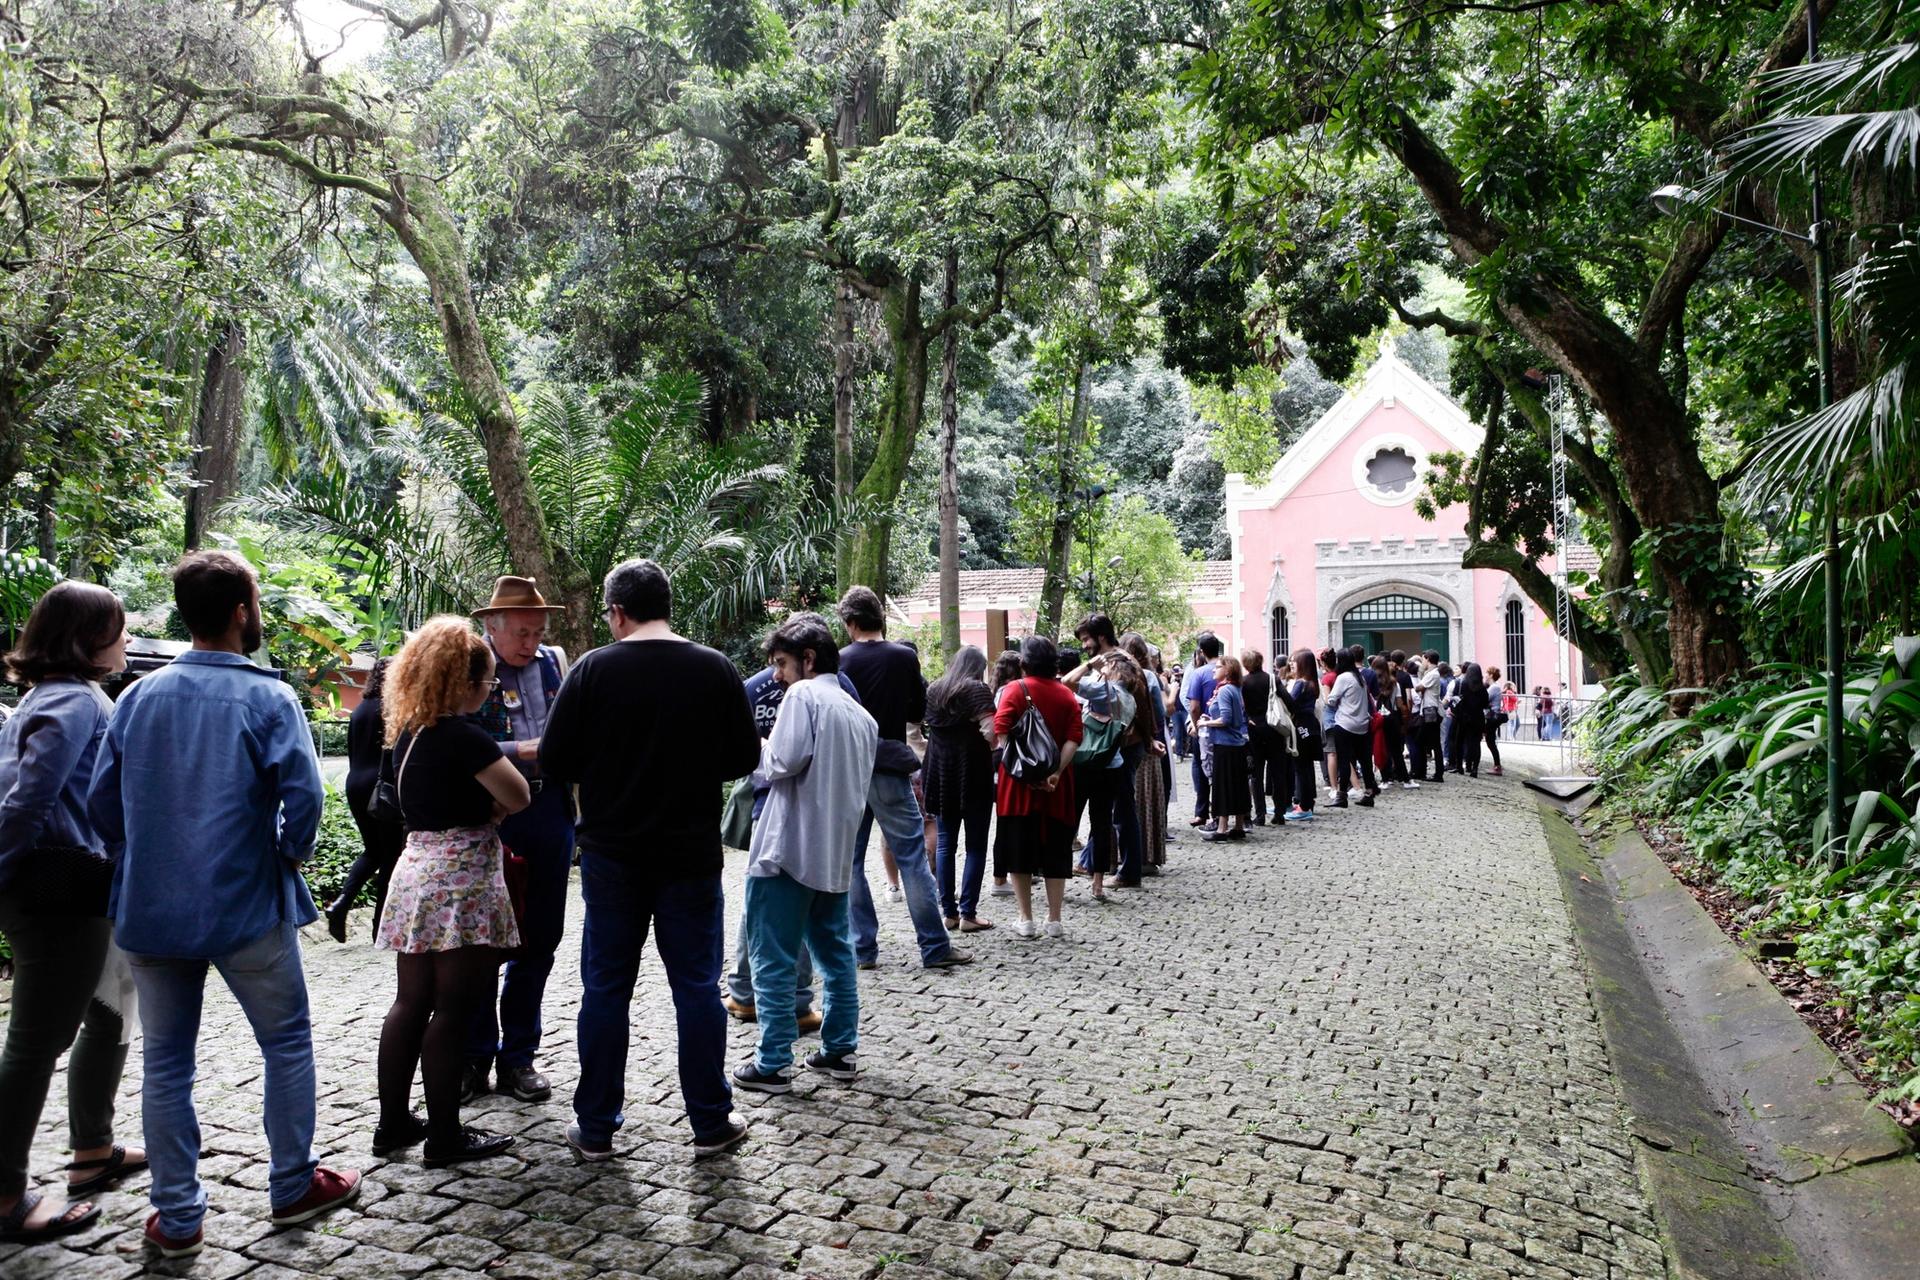 Around 5,000 visitors came to the opening of Queermuseu at the School of Visual Arts Parque Lage on Saturday and 3,000 on Sunday, the museum's director says. The wait time to enter the show was about an hour and half Gabi Carrera